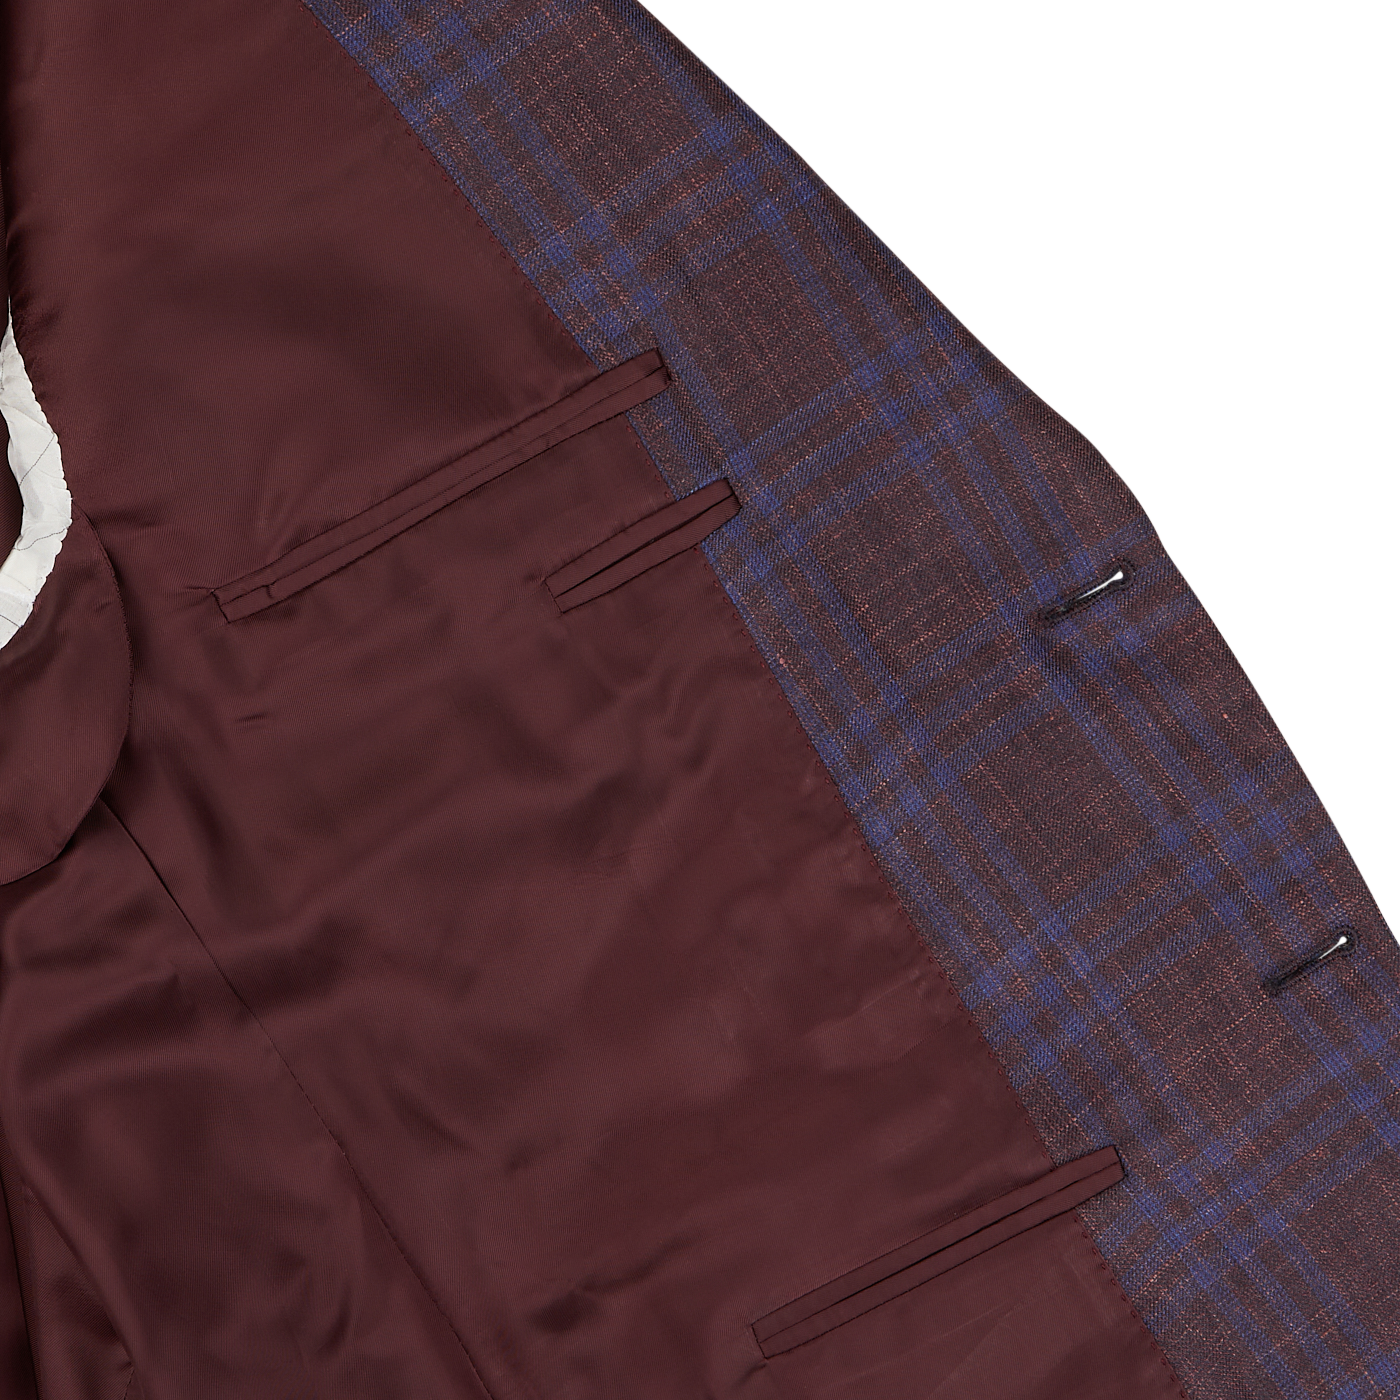 Detail of a Canali wine red checked wool silk linen blazer showing the texture of the fabric and pockets on a white background.